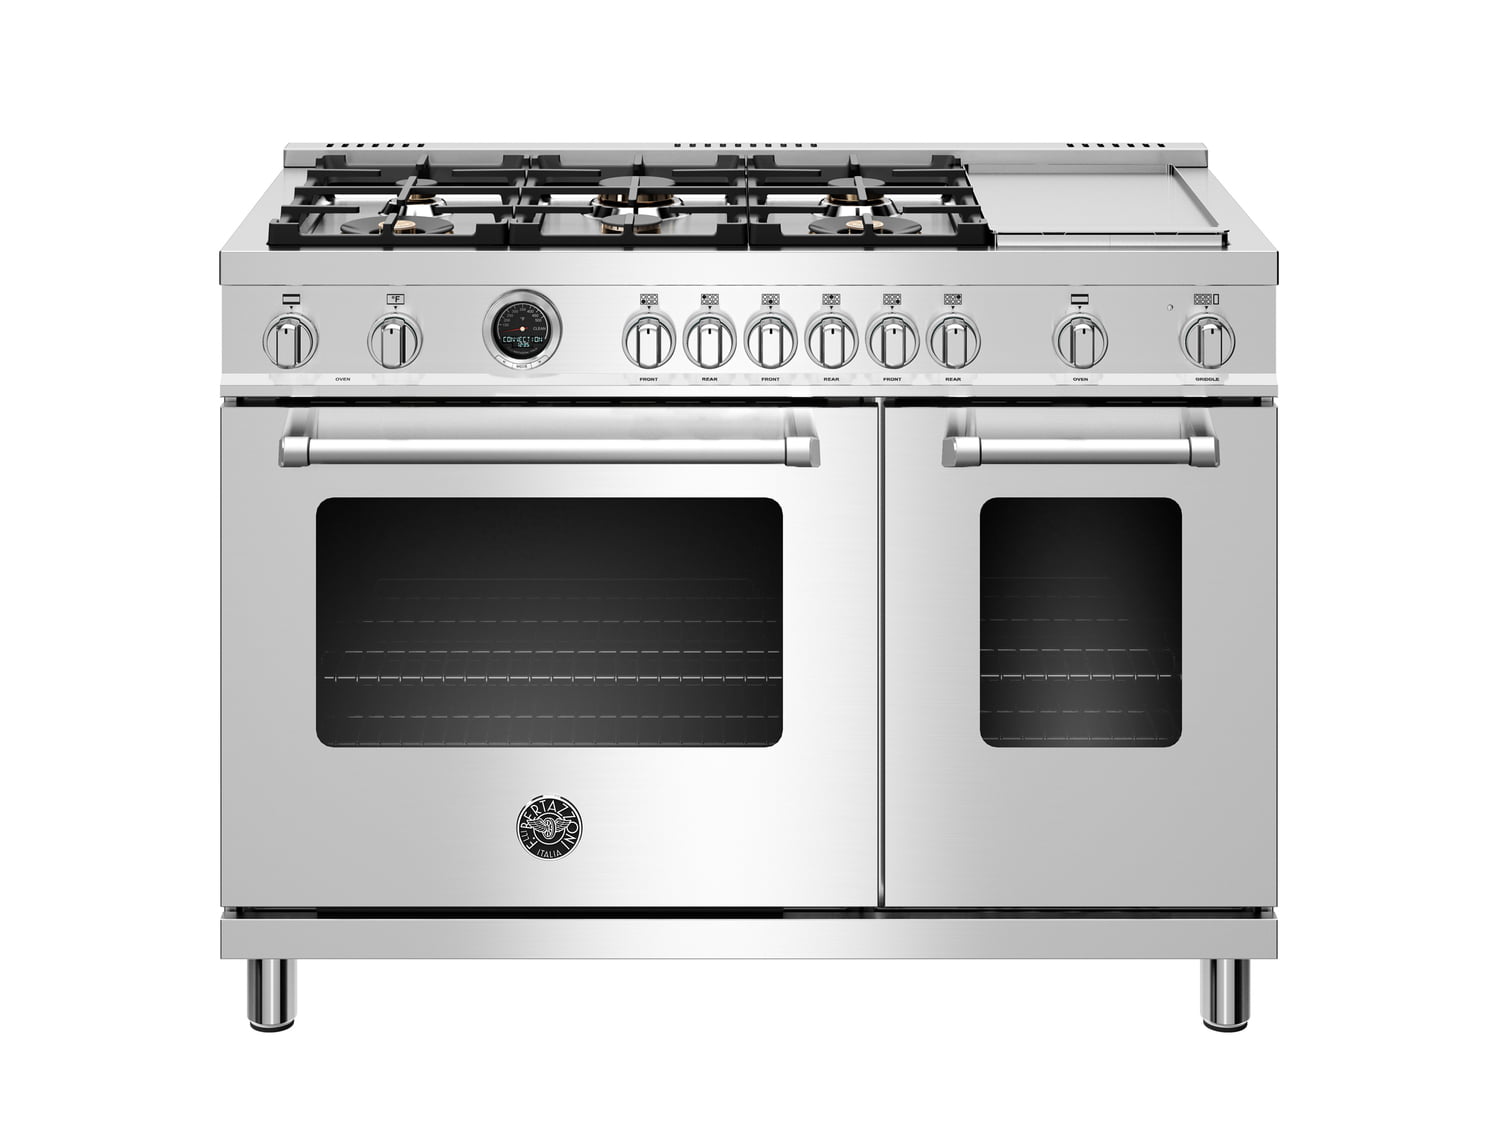 Bertazzoni MAST486GDFSXT 48 Inch Dual Fuel Range, 6 Brass Burners And Griddle, Electric Self-Clean Oven Stainless Steel